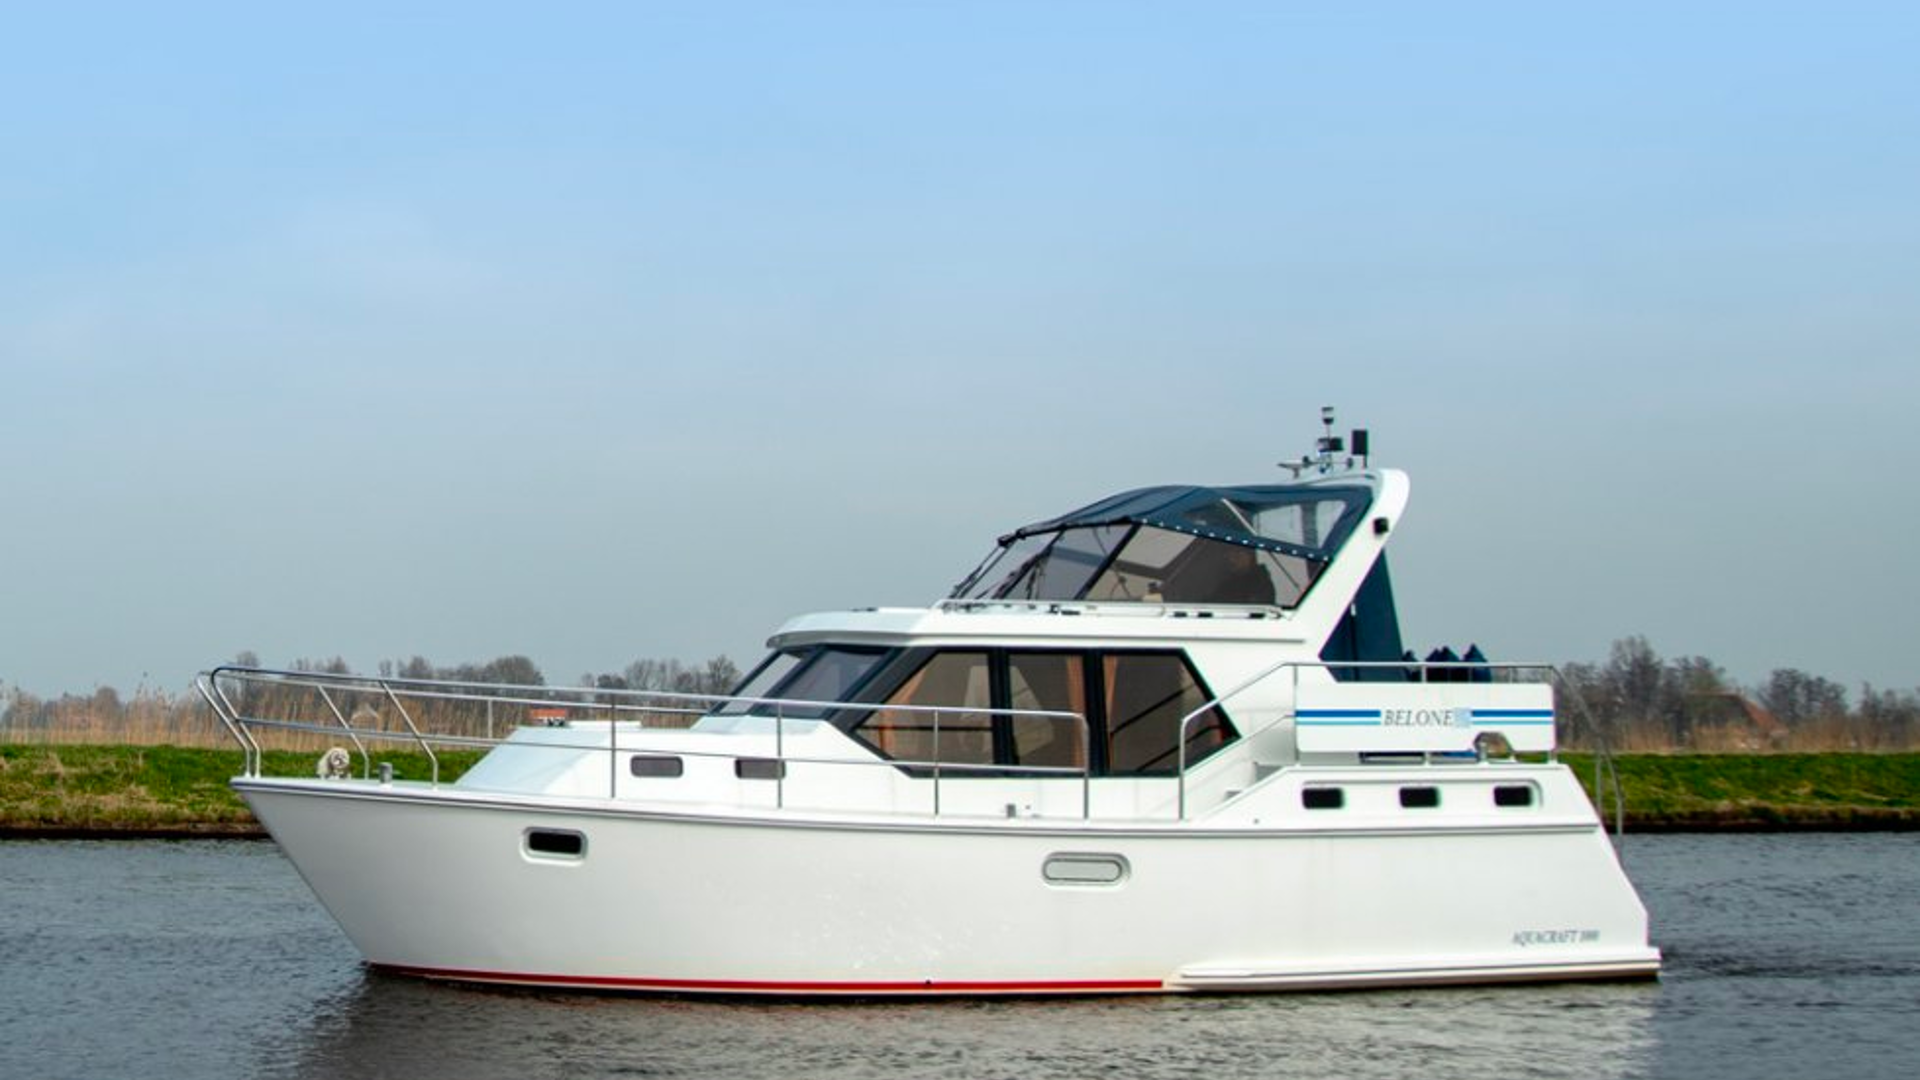 A selection from our fleet of motor yachts